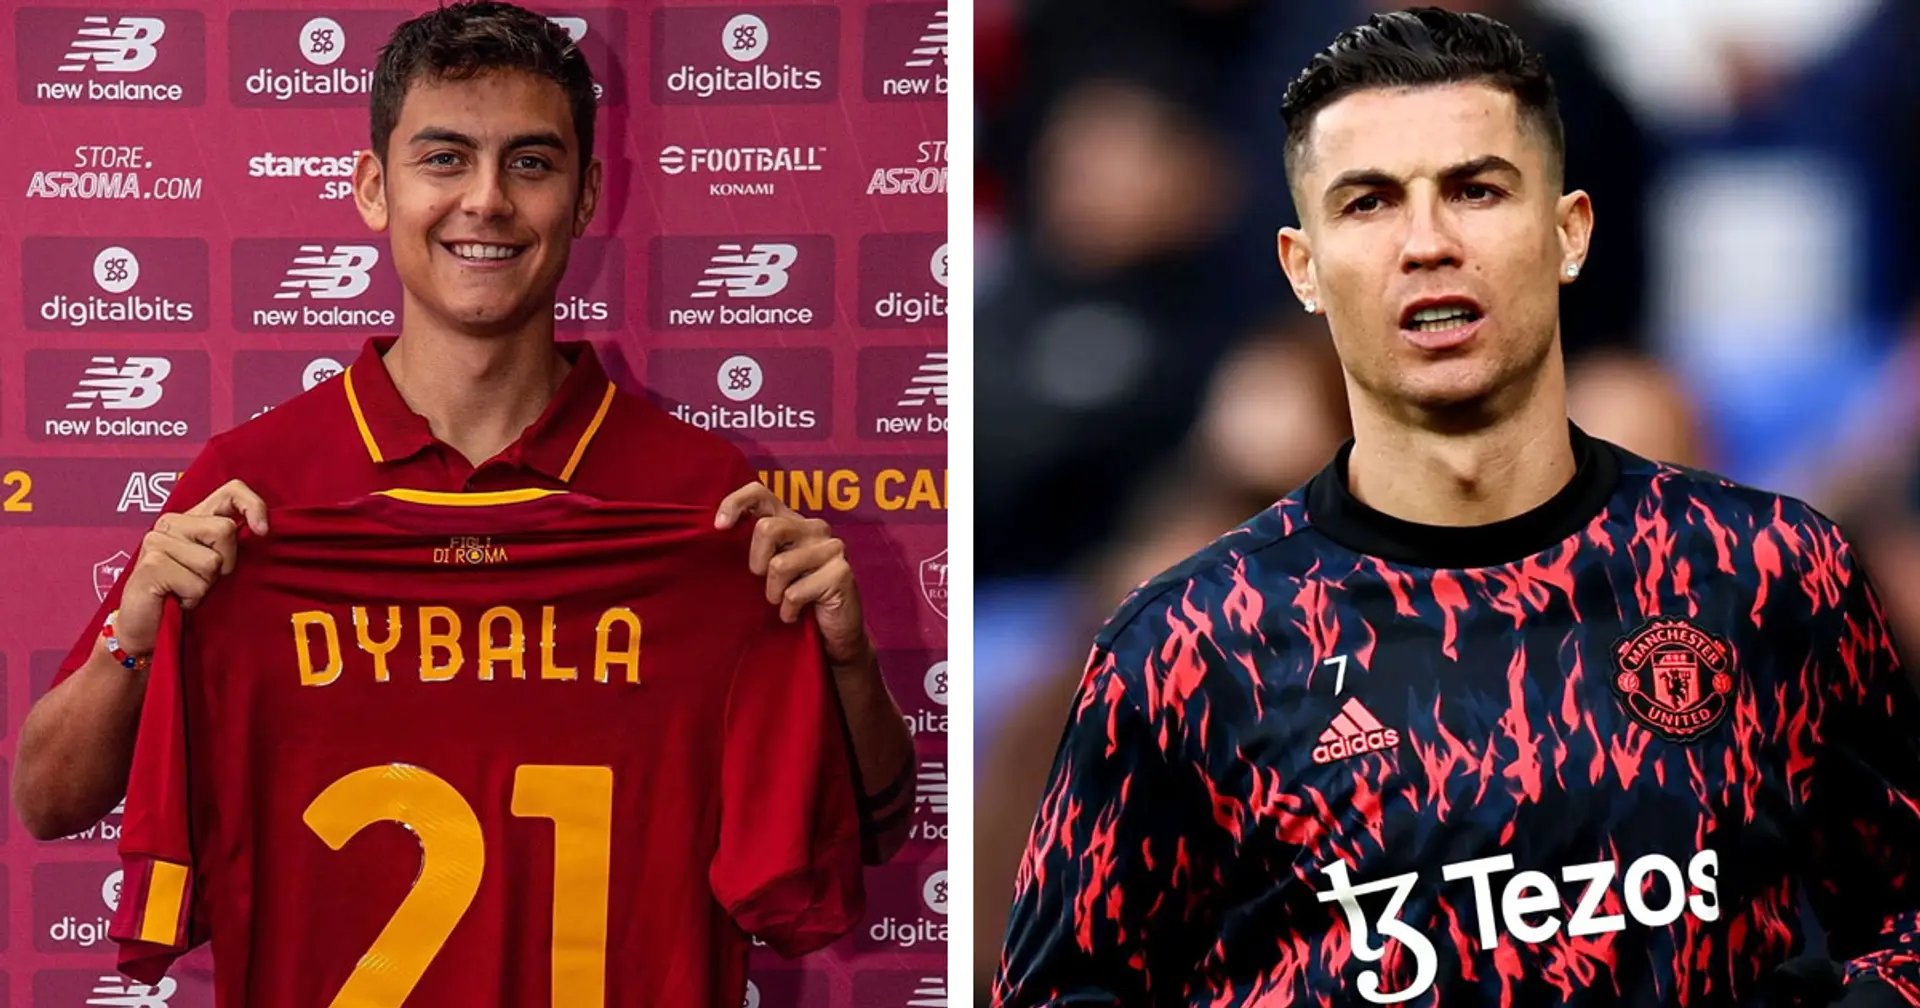 Paulo Dybala reportedly breaks Ronaldo's record for most jerseys sold in Italy in single day